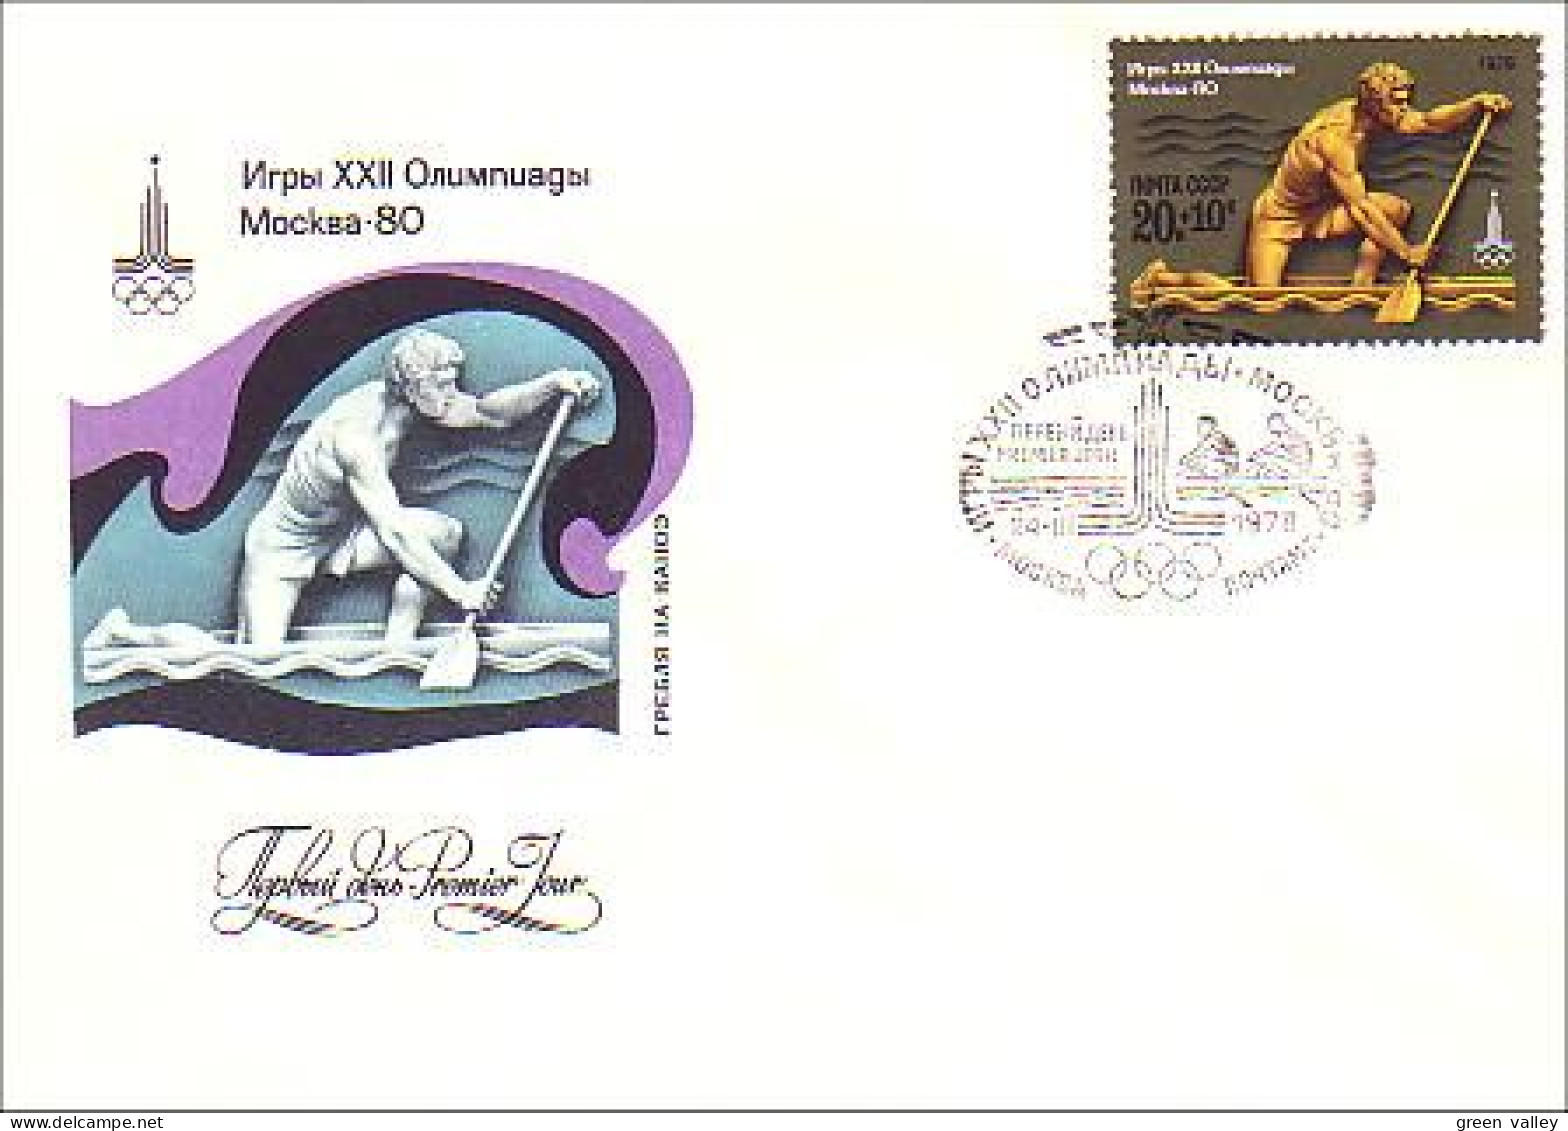 Russie Canoe Aviron Rowing 1980 FDC Cover ( A90 372b) - Canoa